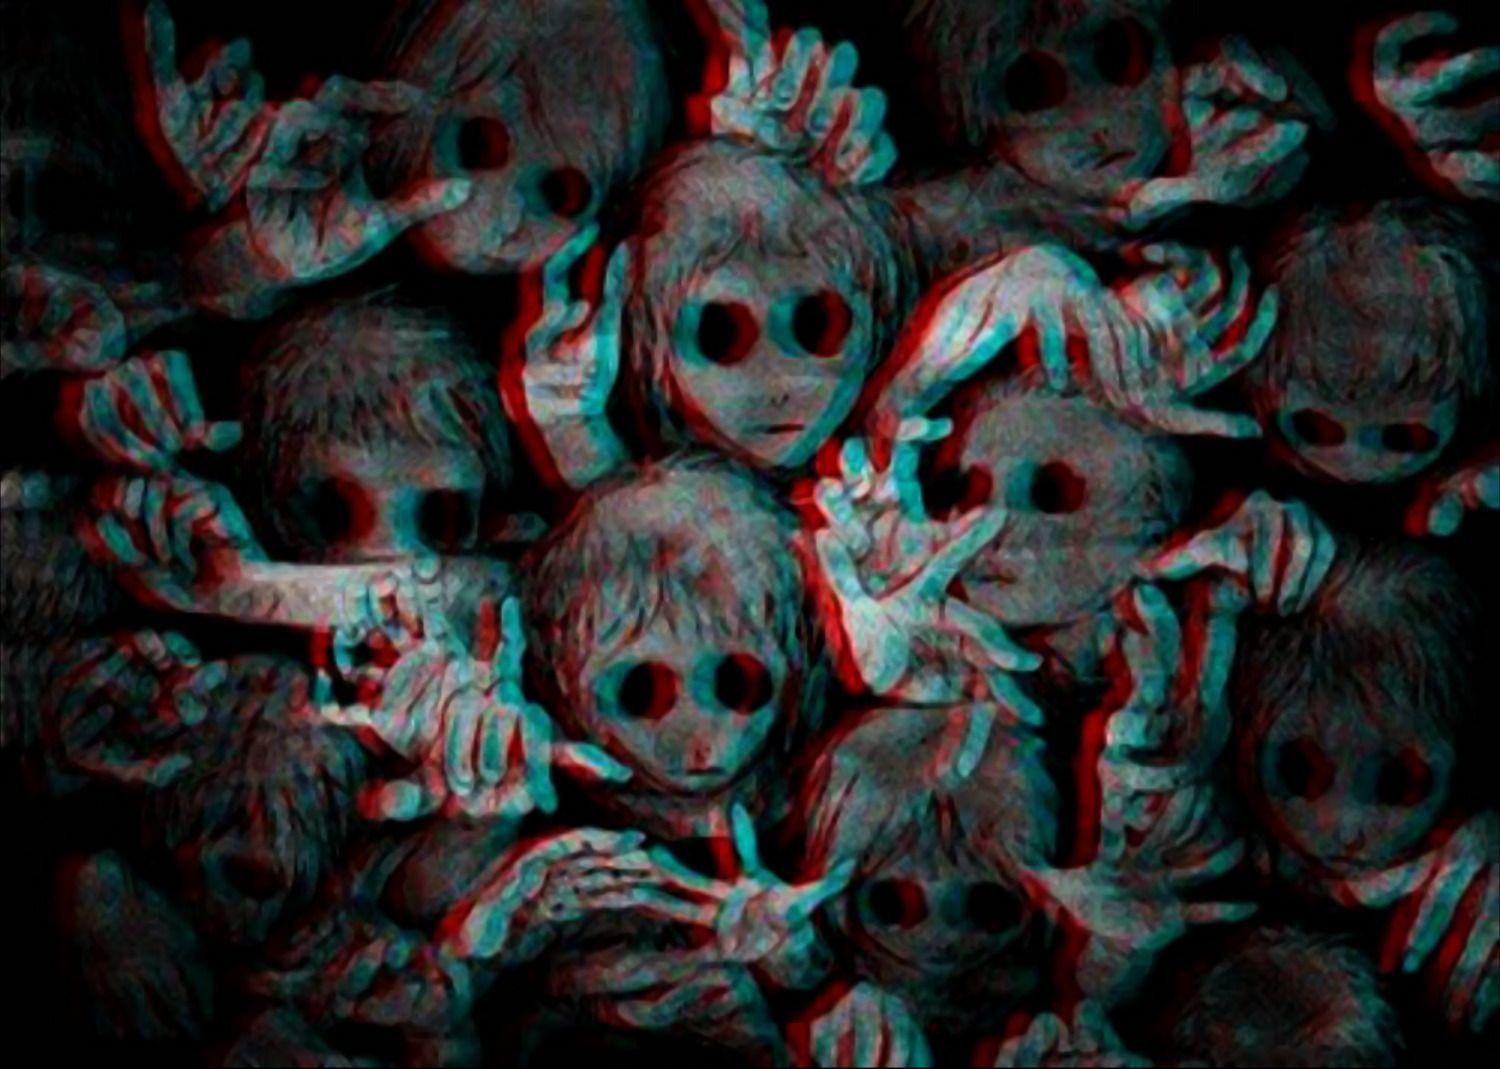 Creepy Wallpaper Collection. Scary wallpaper, Creepy background, Dark wallpaper iphone